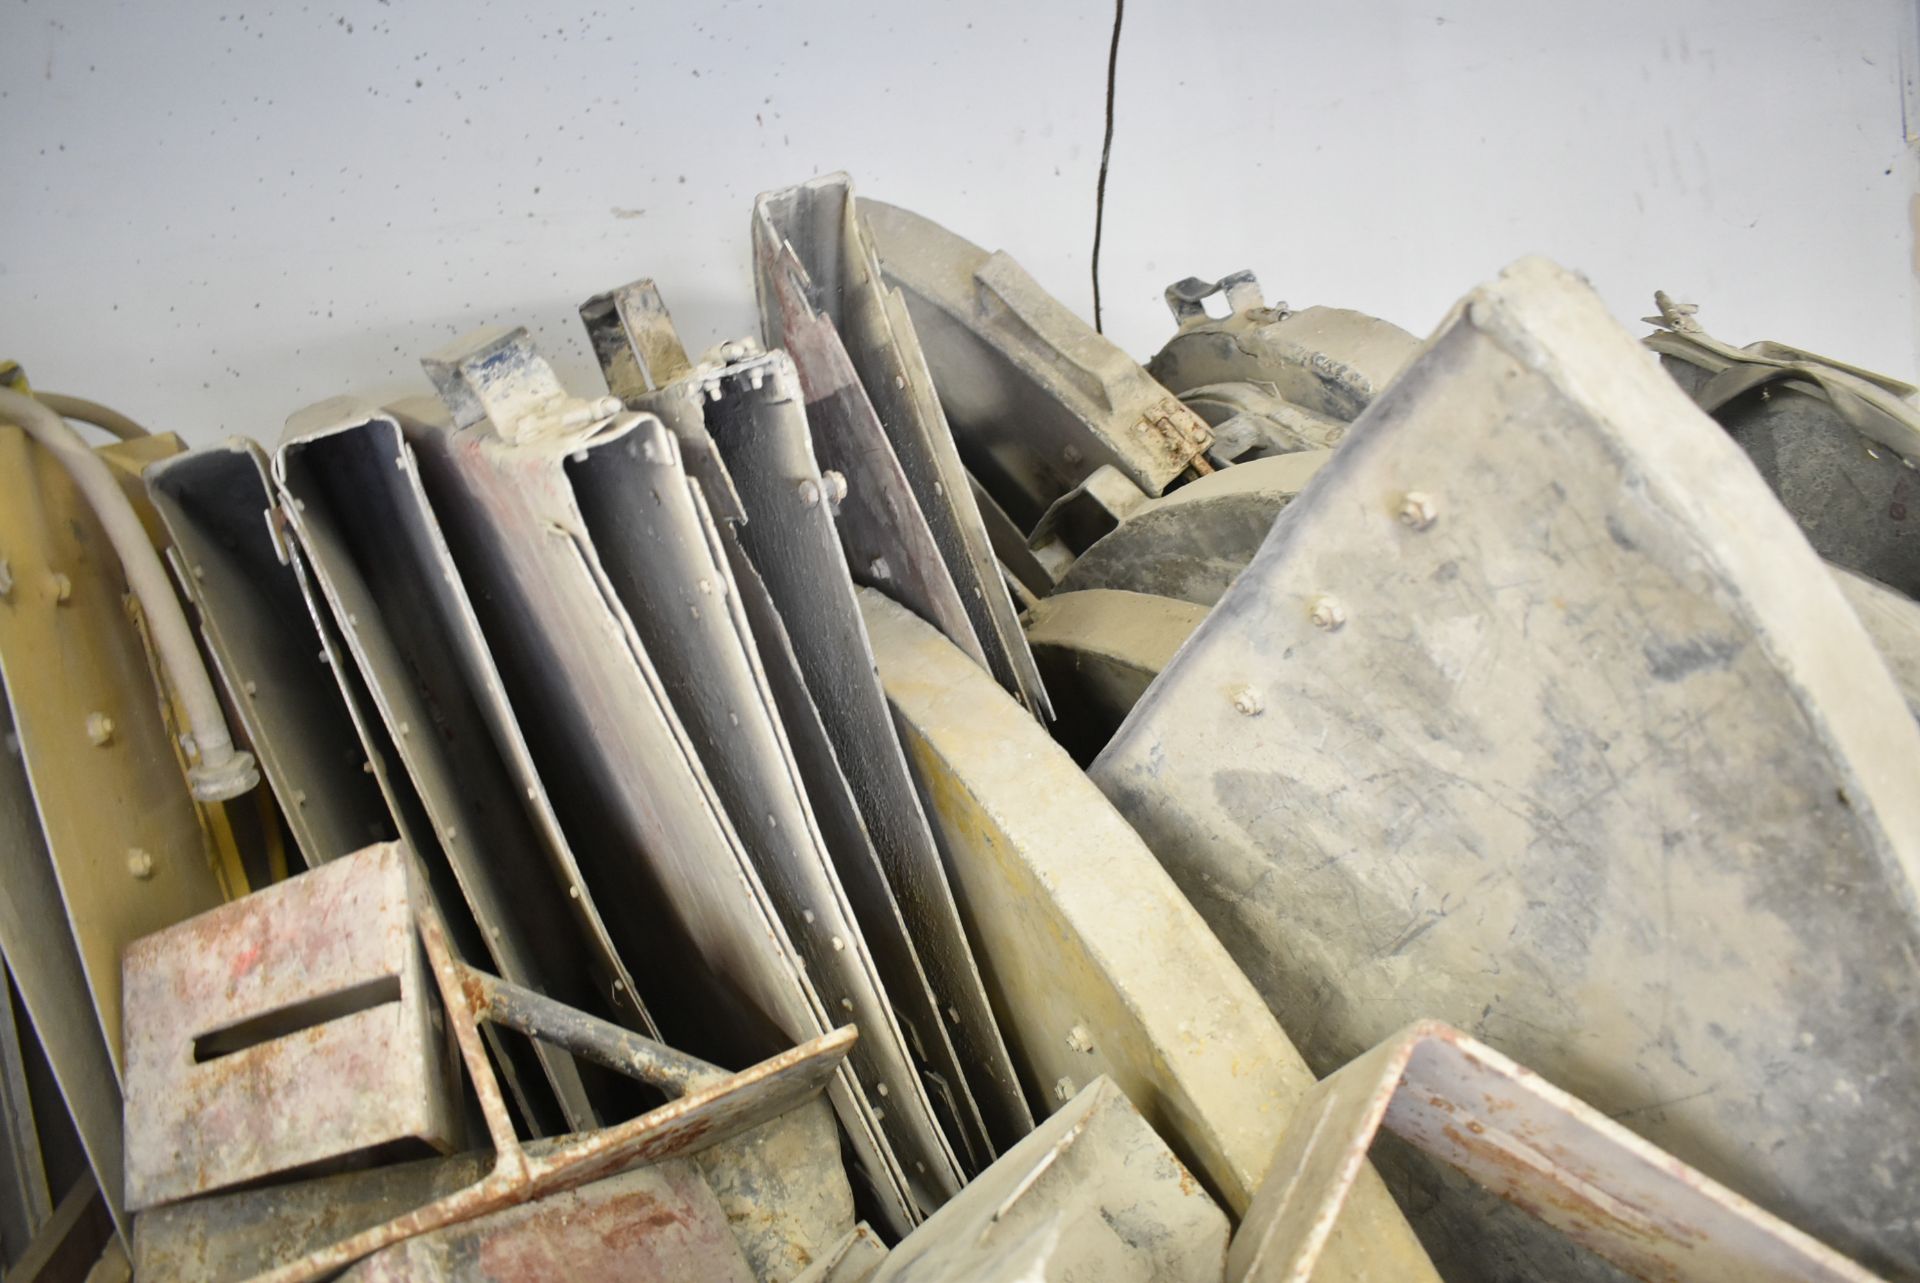 LOT/ PALLET WITH CONTENTS CONSISTING OF CONCRETE SAW COVERS